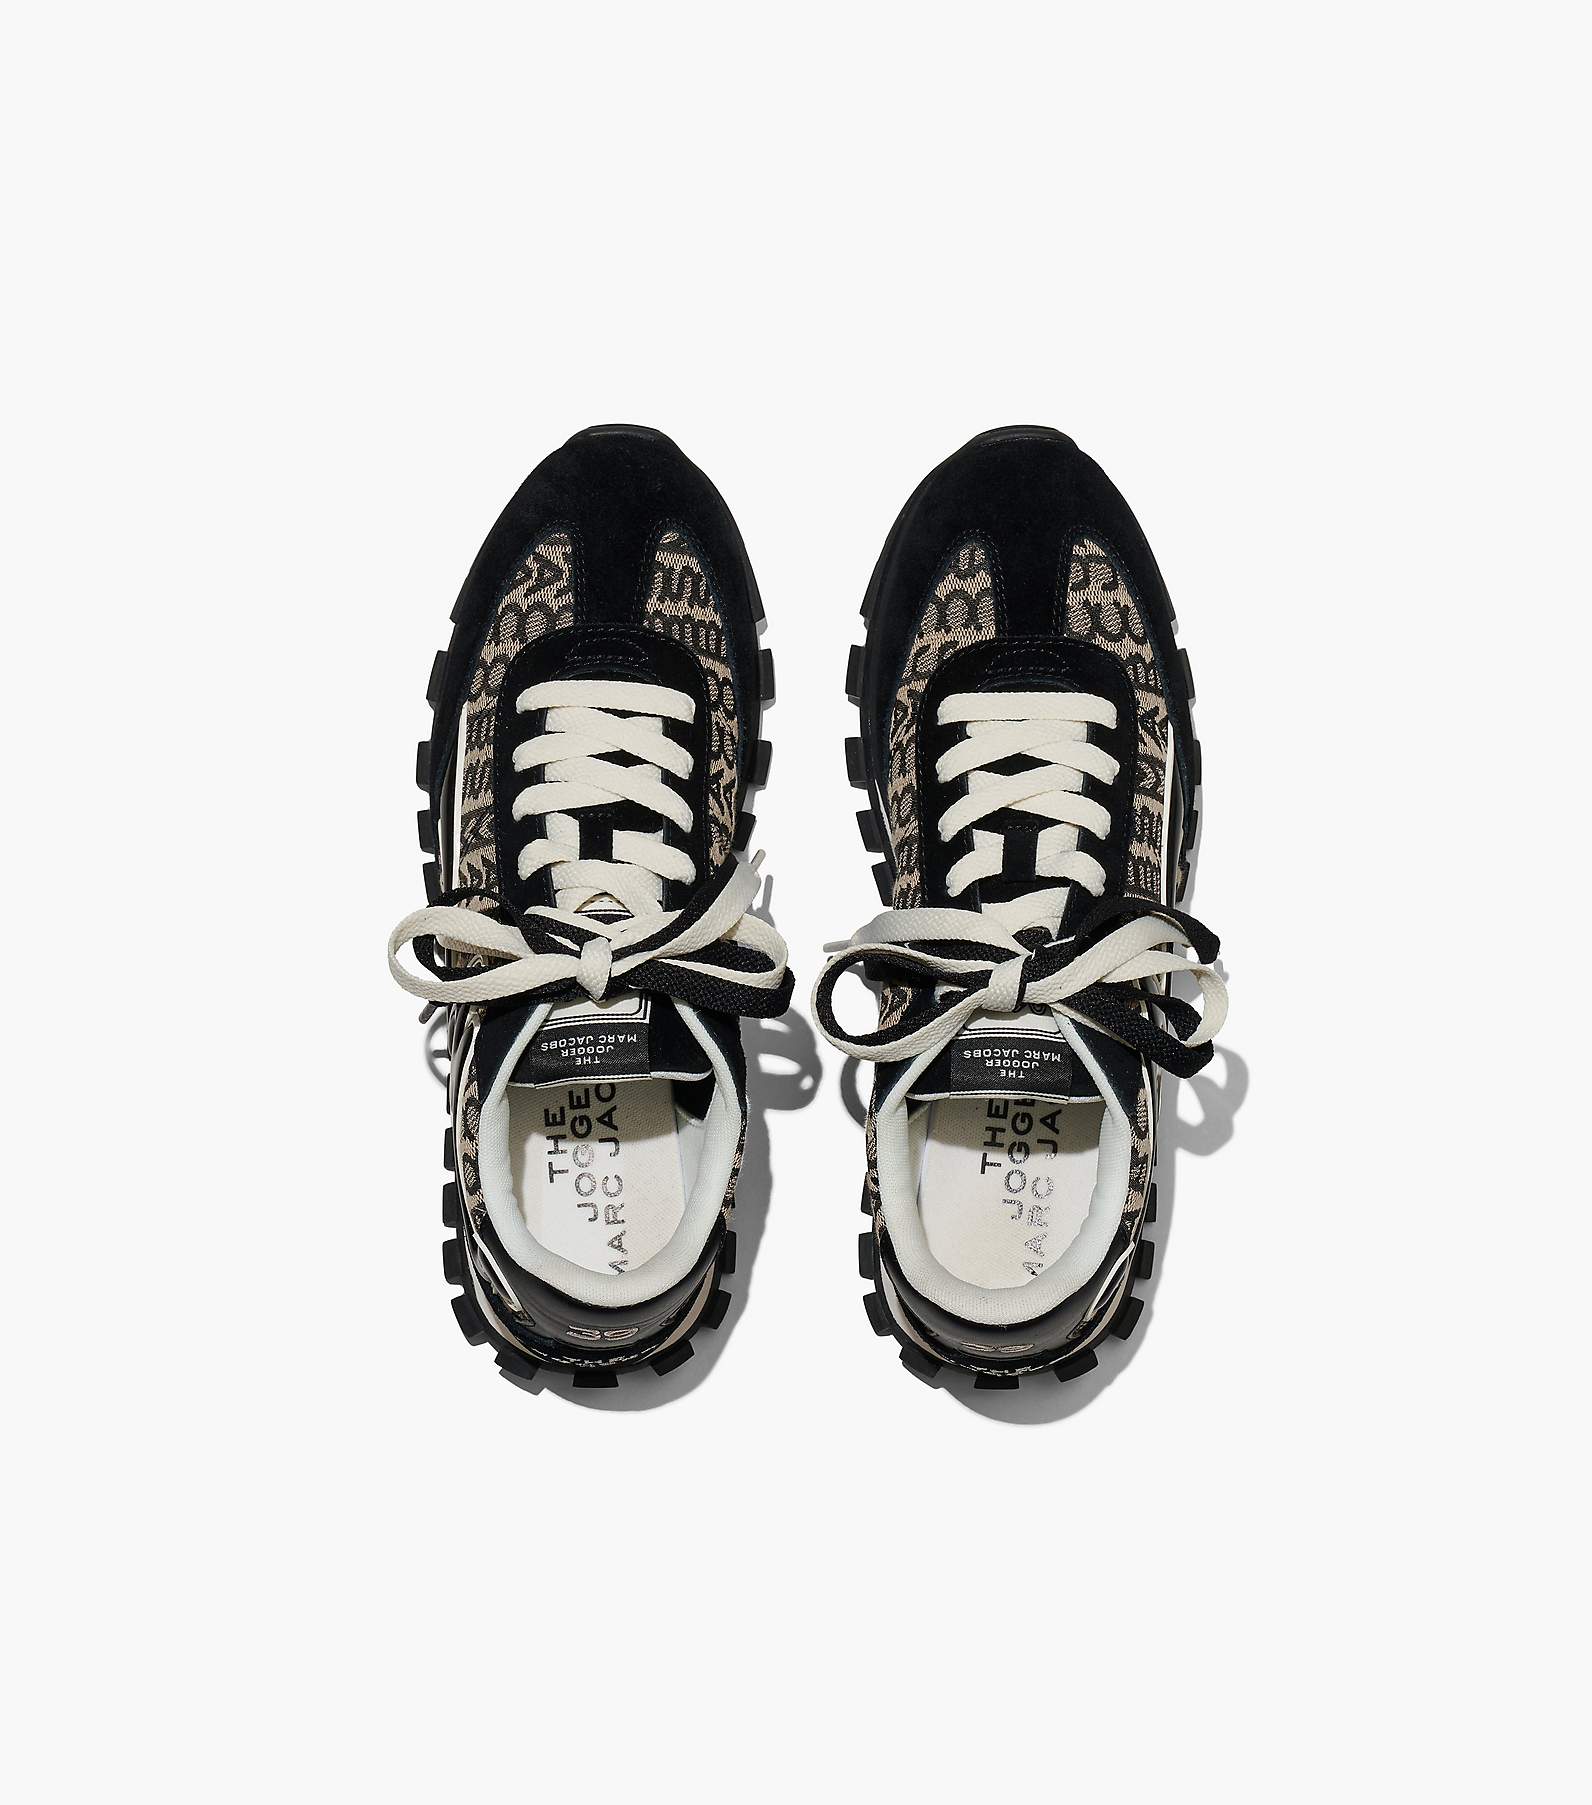 MARC JACOBS THE JOGGER SHOES BLACK MULTI SIZE 35 Brand New